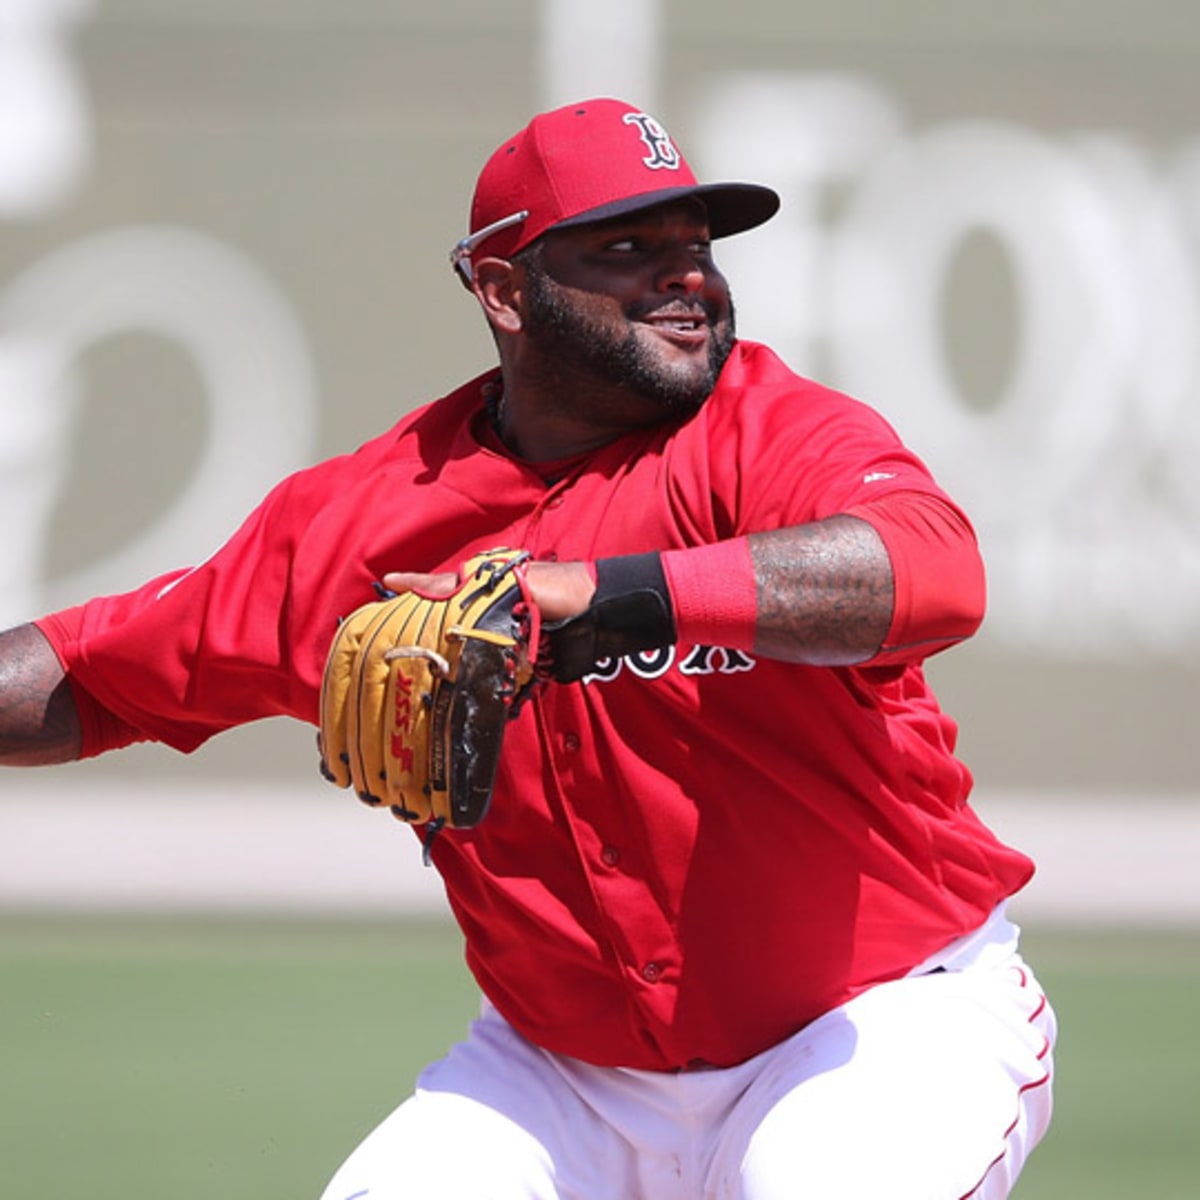 Ex-trainer says Pablo Sandoval needs babysitter to control weight